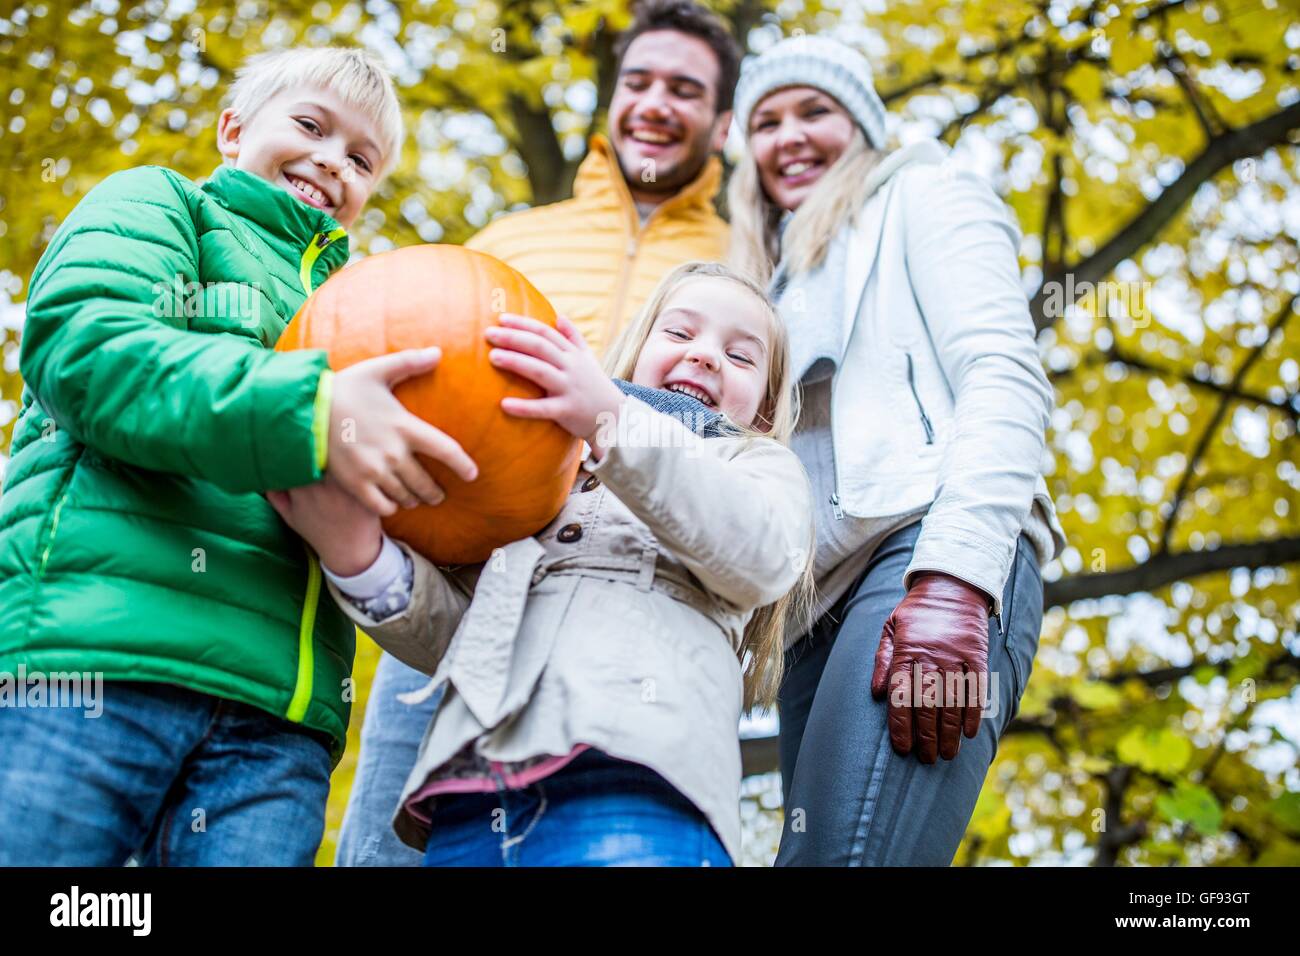 MODEL RELEASED. Children holding pumpkin while parents standing behind, smiling. Stock Photo